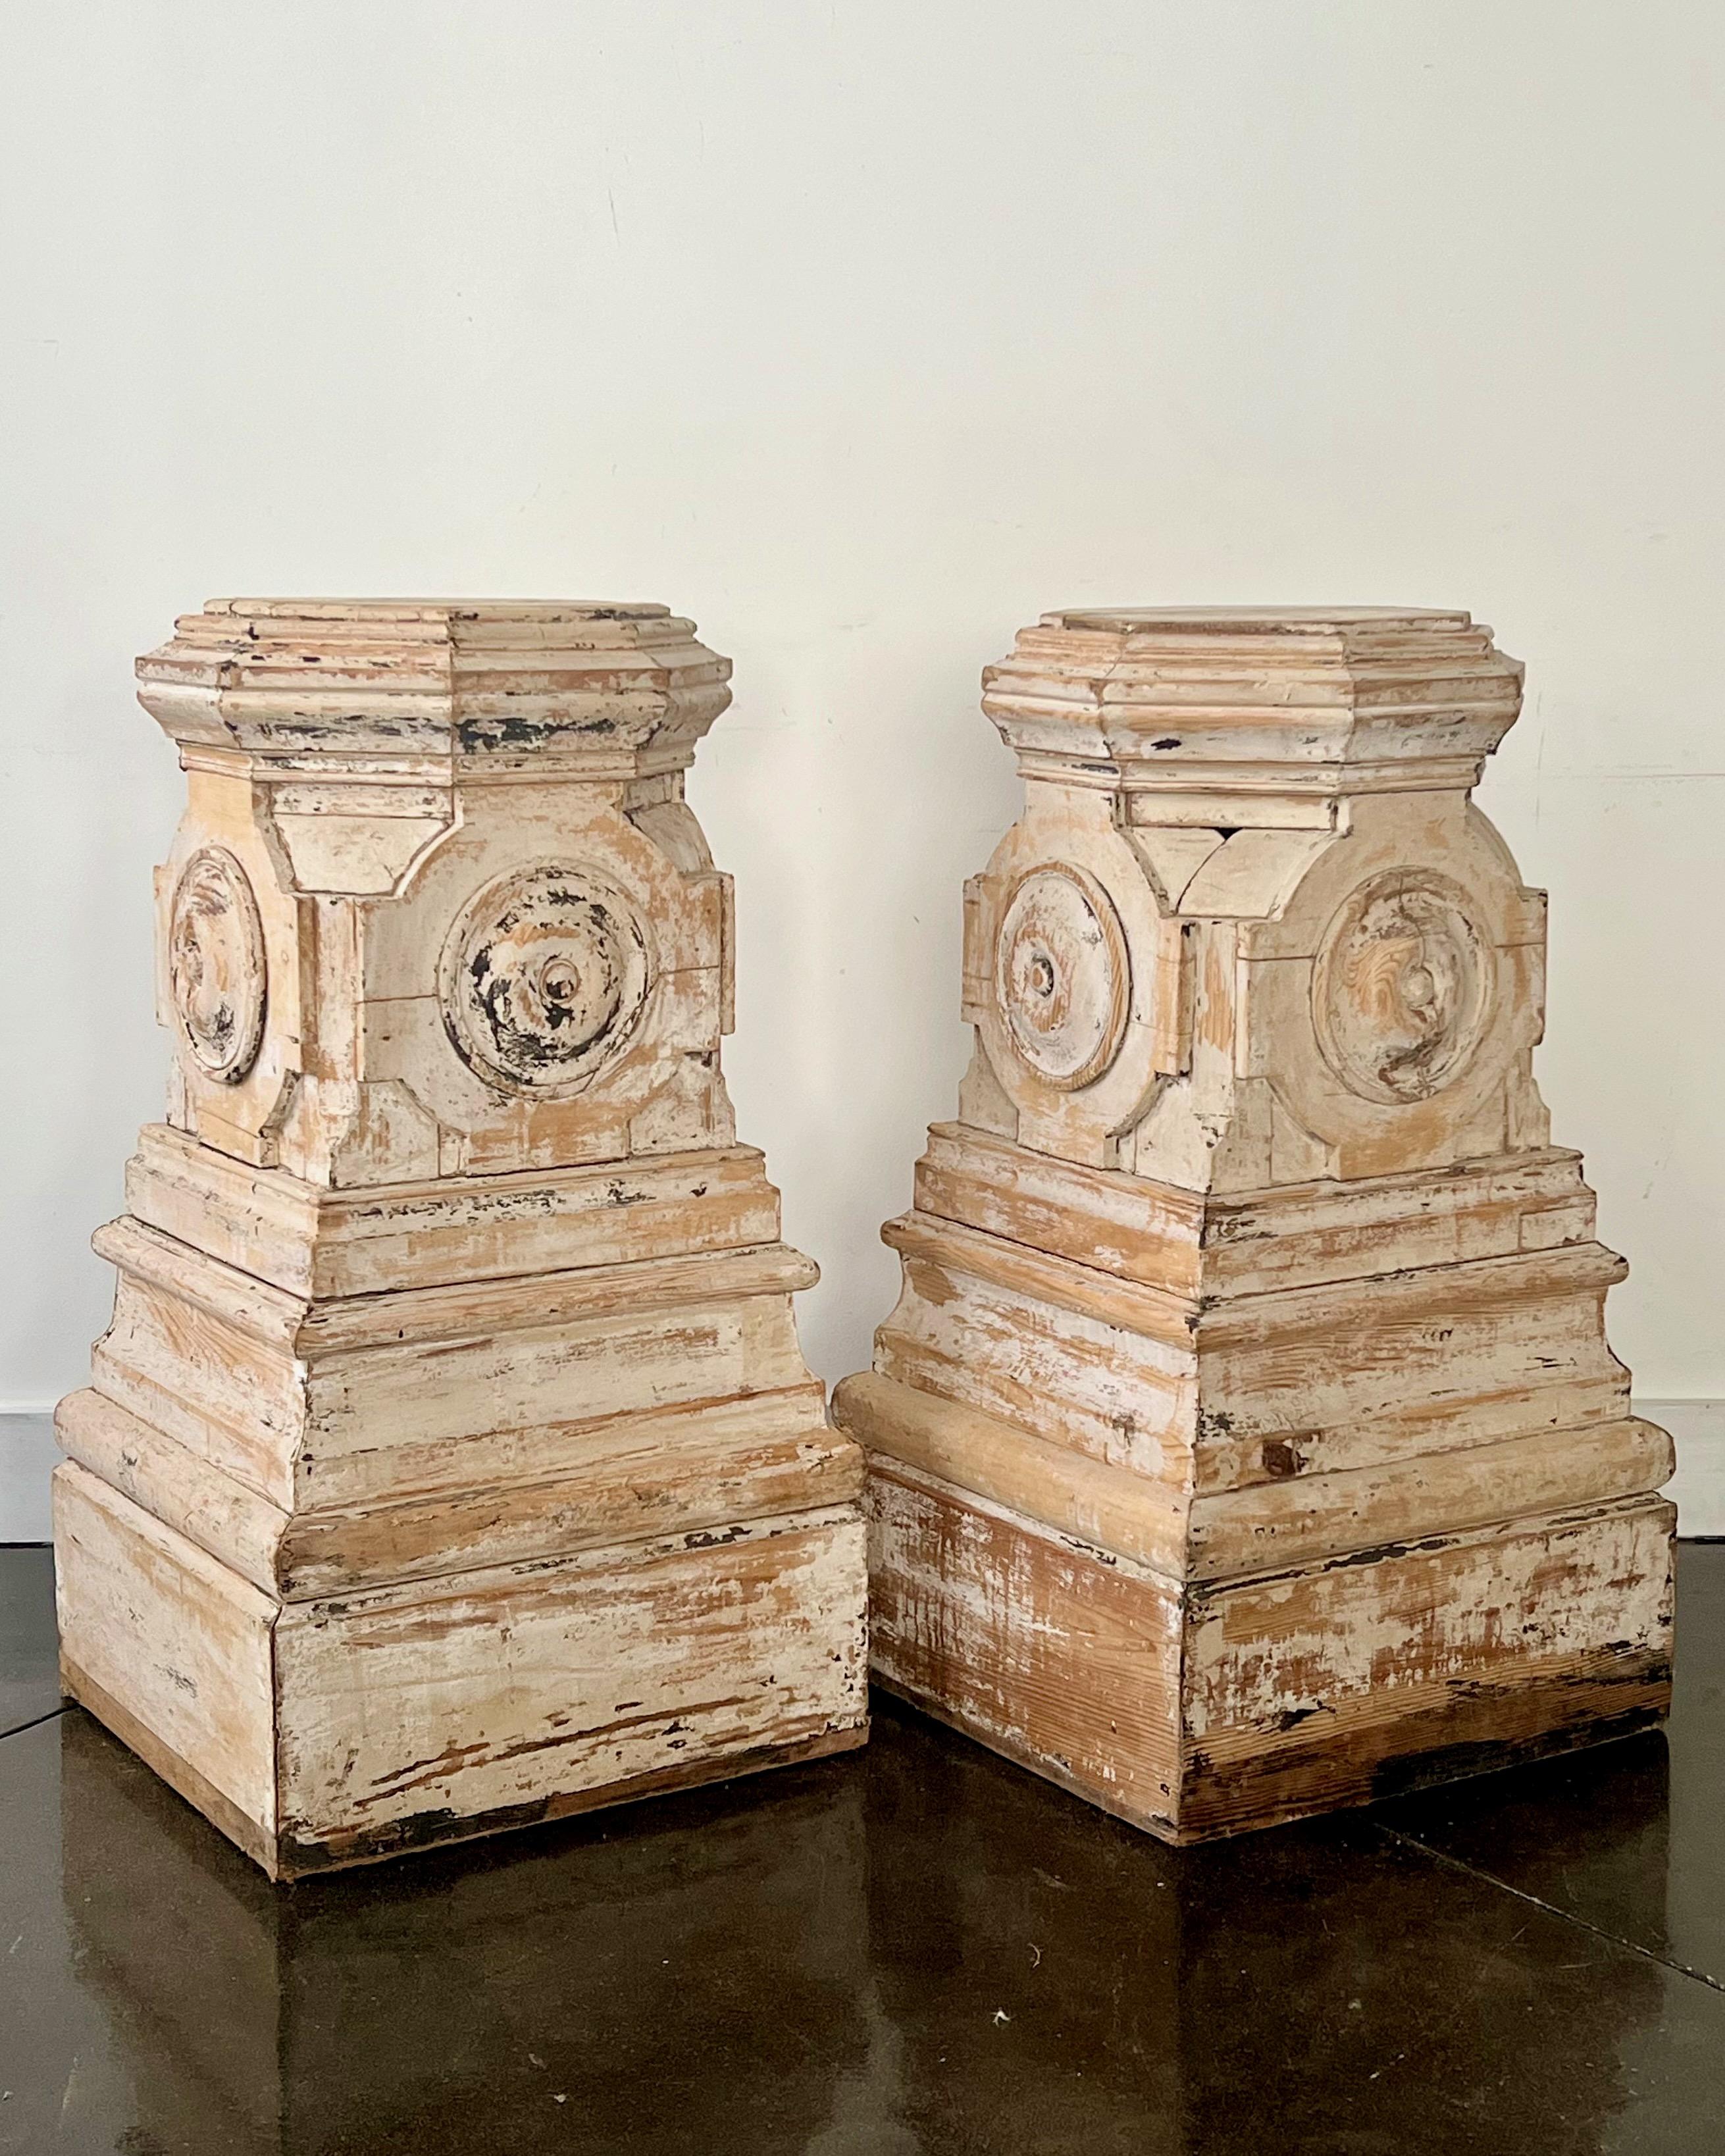 Pair of 19th centuryFrench carved wood pedestals/stands with
the four-sided column design and tops in octagon shape are handcrafted in symmetry and refined elegance with multiple tiered molded base.
Construction of the pedestals reflect a skillful